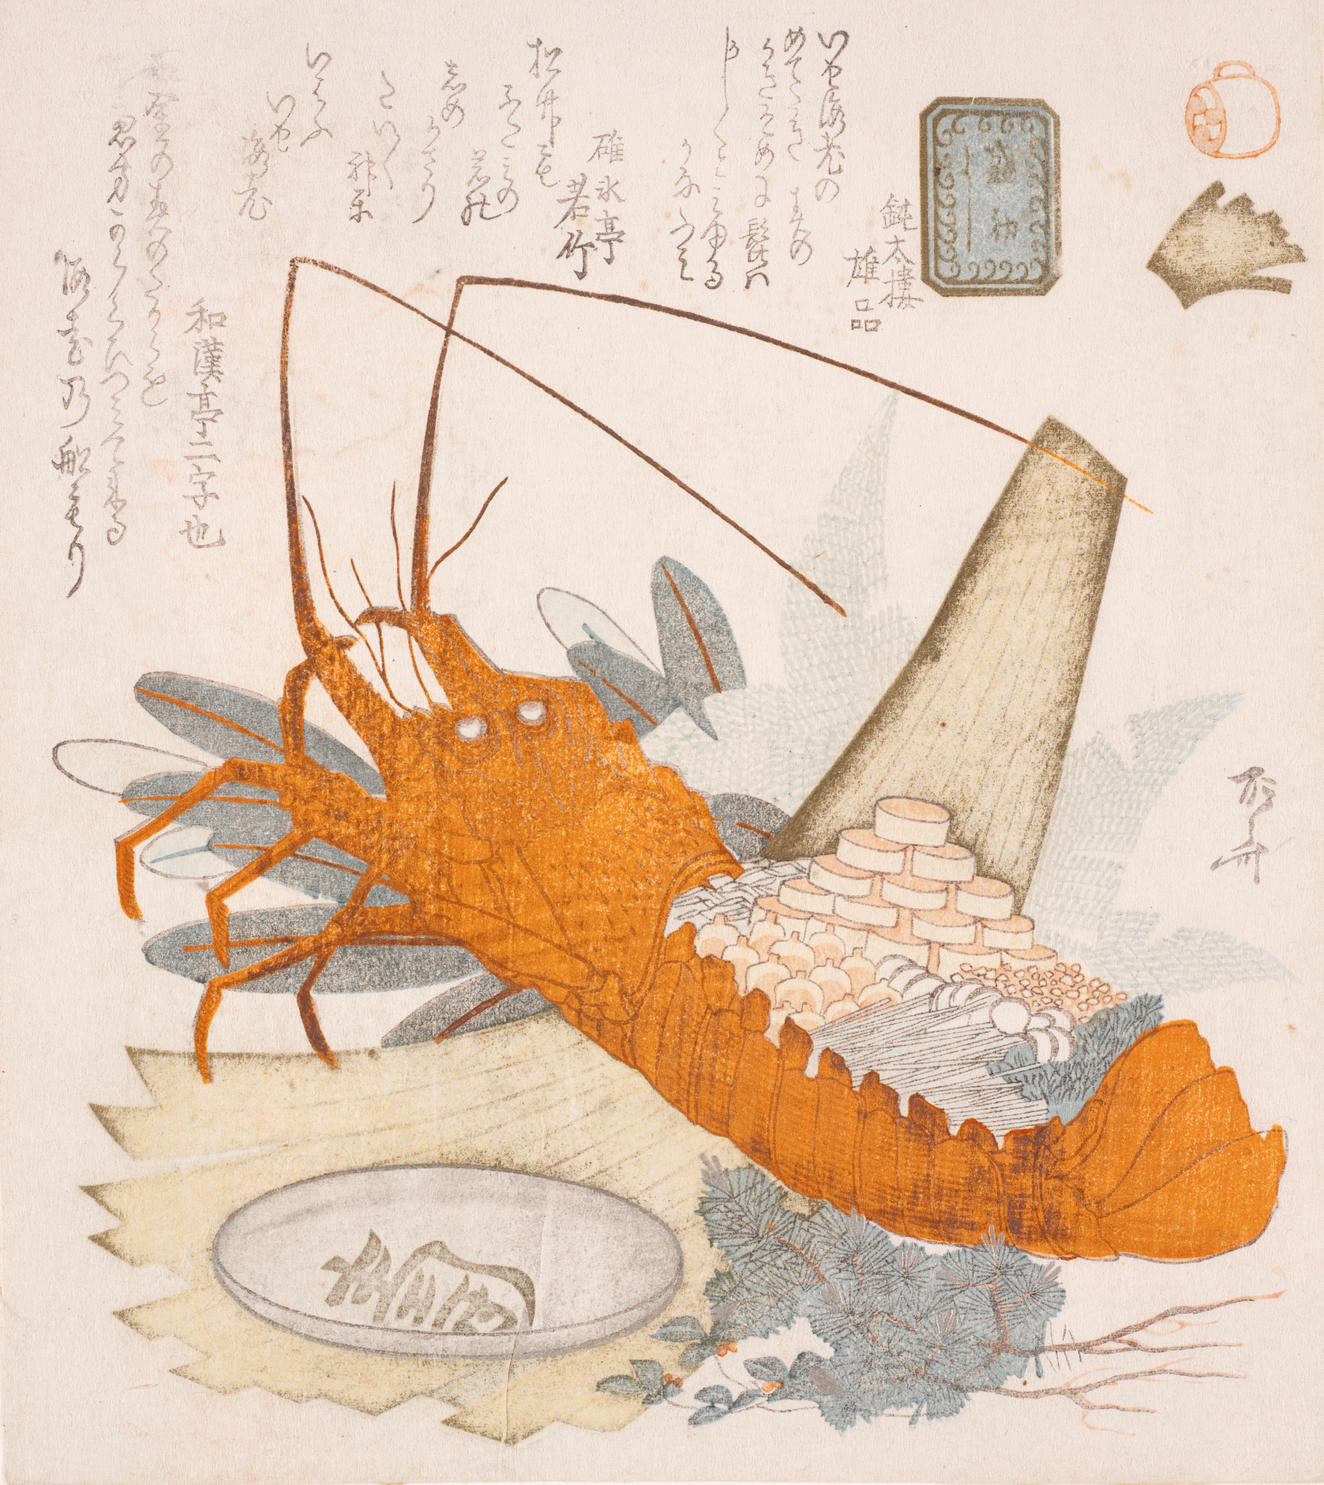 A color print with a large, orange lobster in the center with its tail open holding many small items and Japanese writing above it. Next to the lobster there is a dish, green leaves and twigs. 